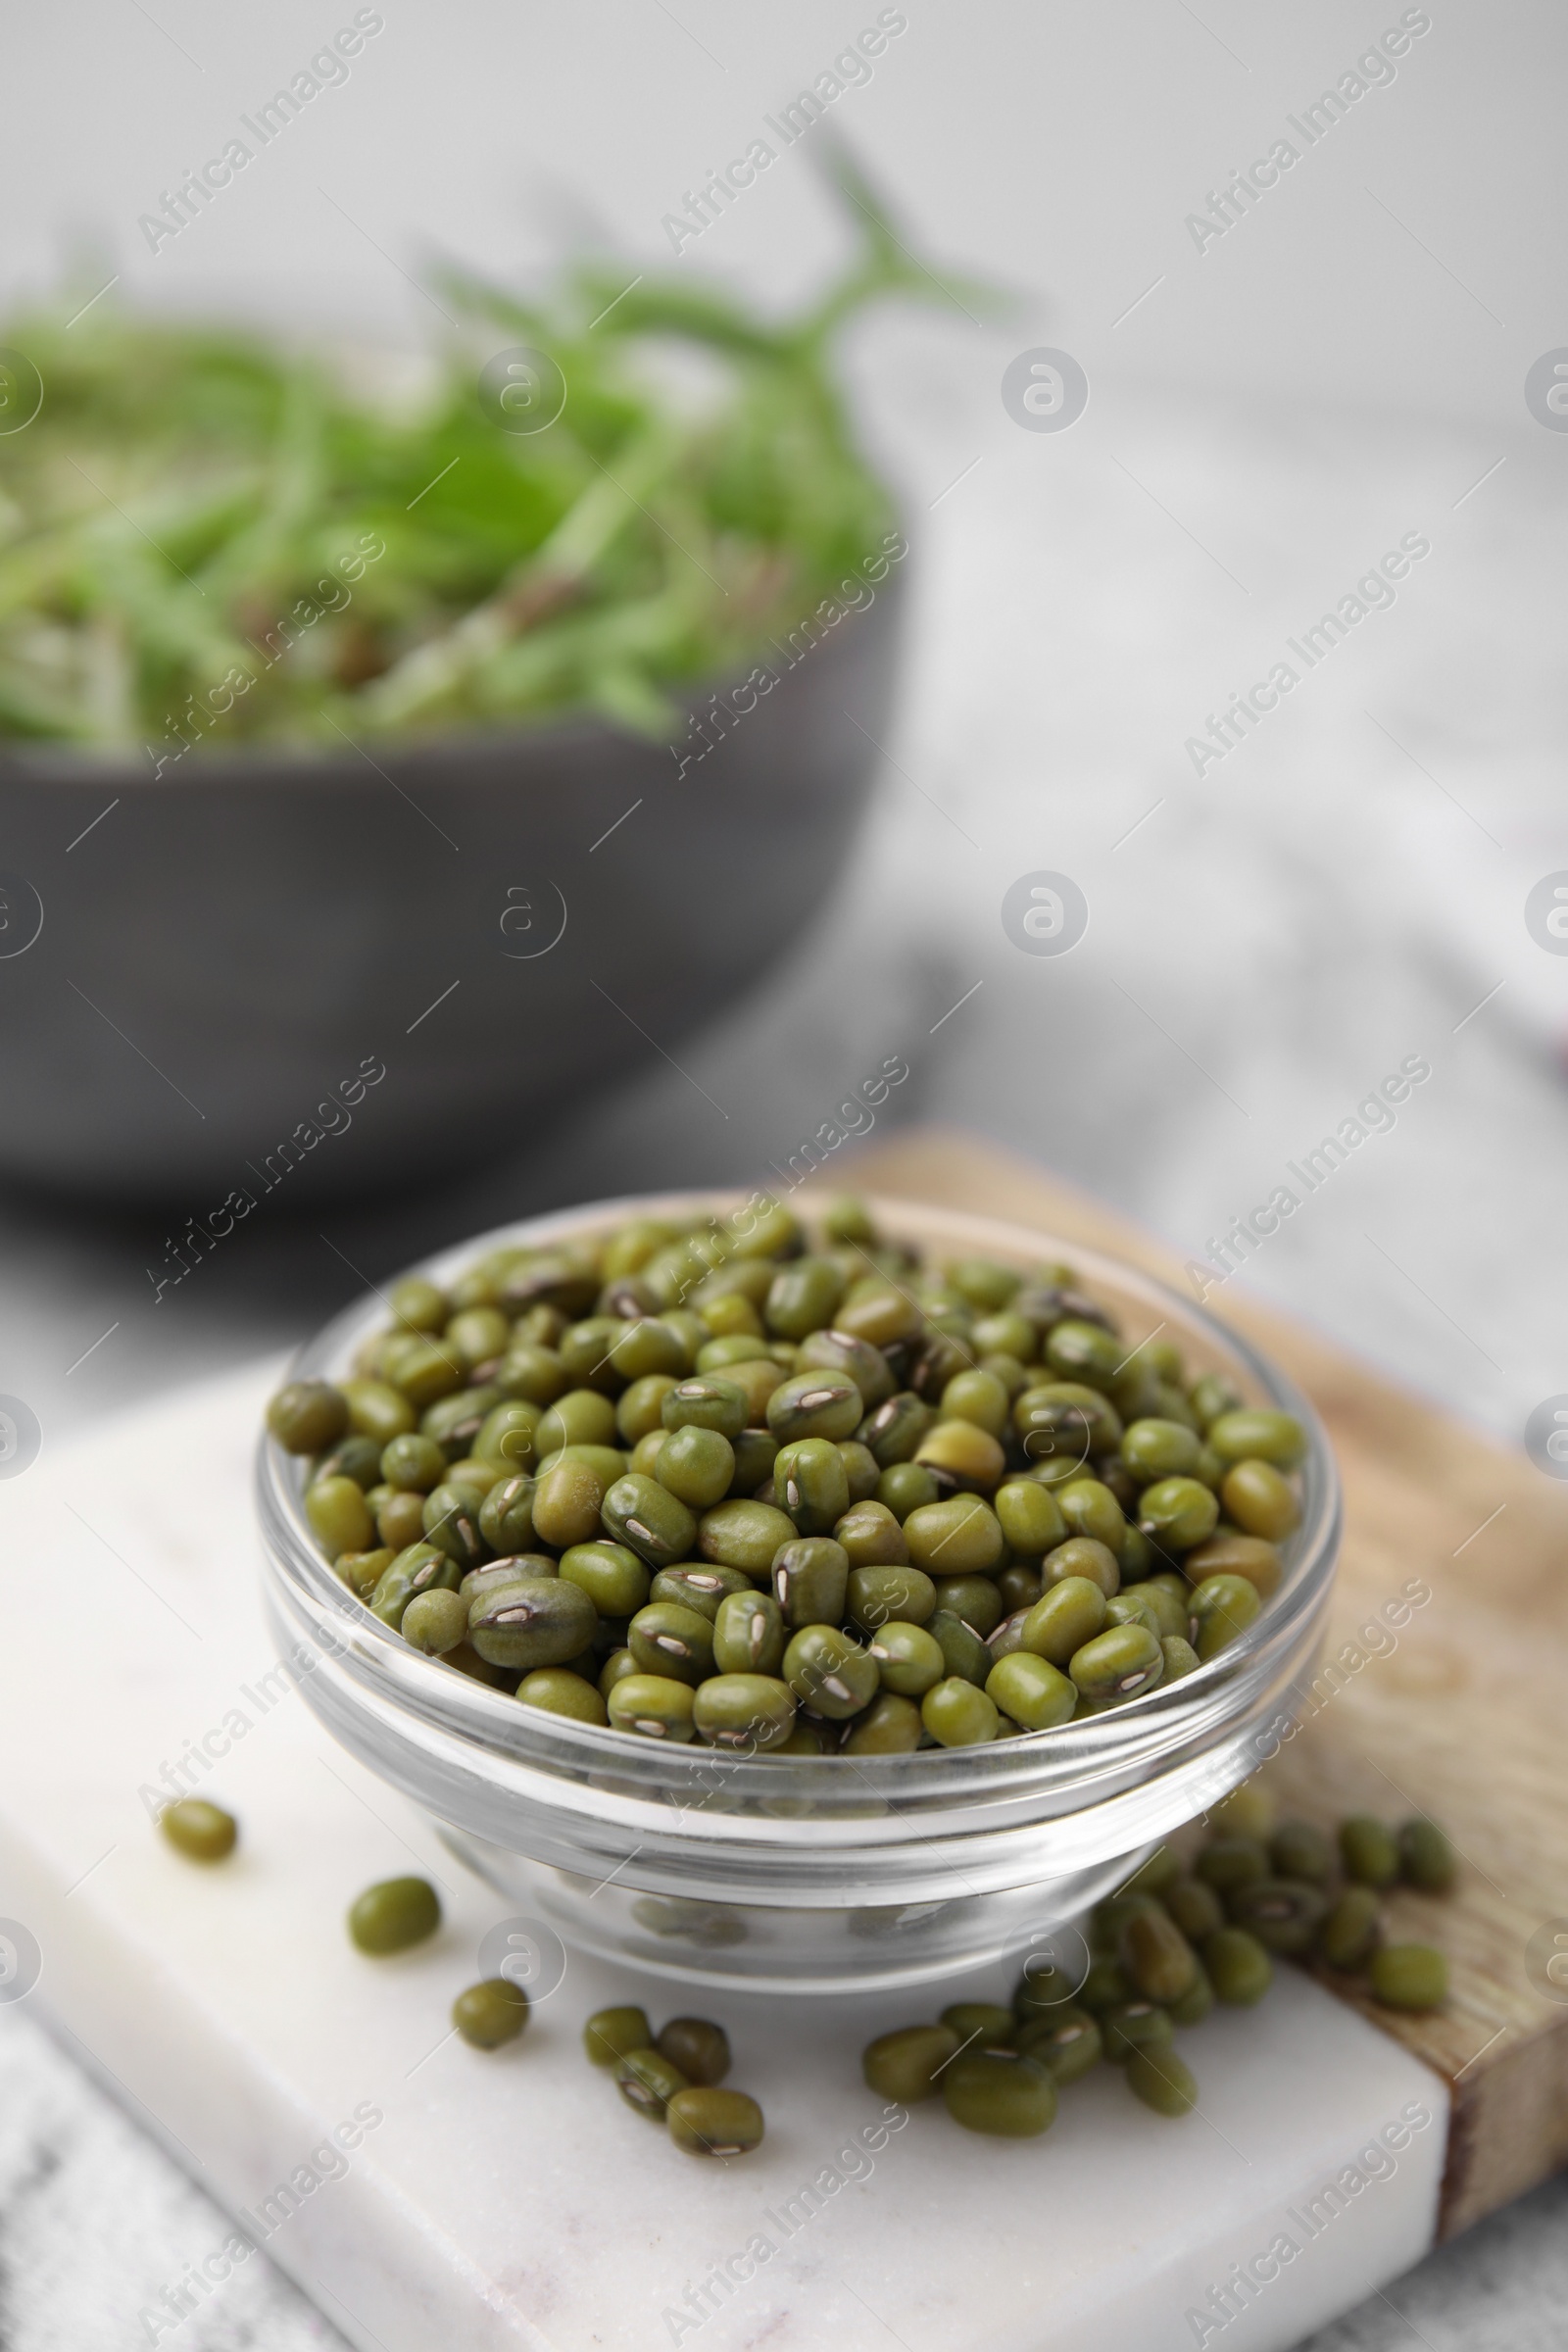 Photo of Glass bowl with mung beans and coaster on white textured table, closeup